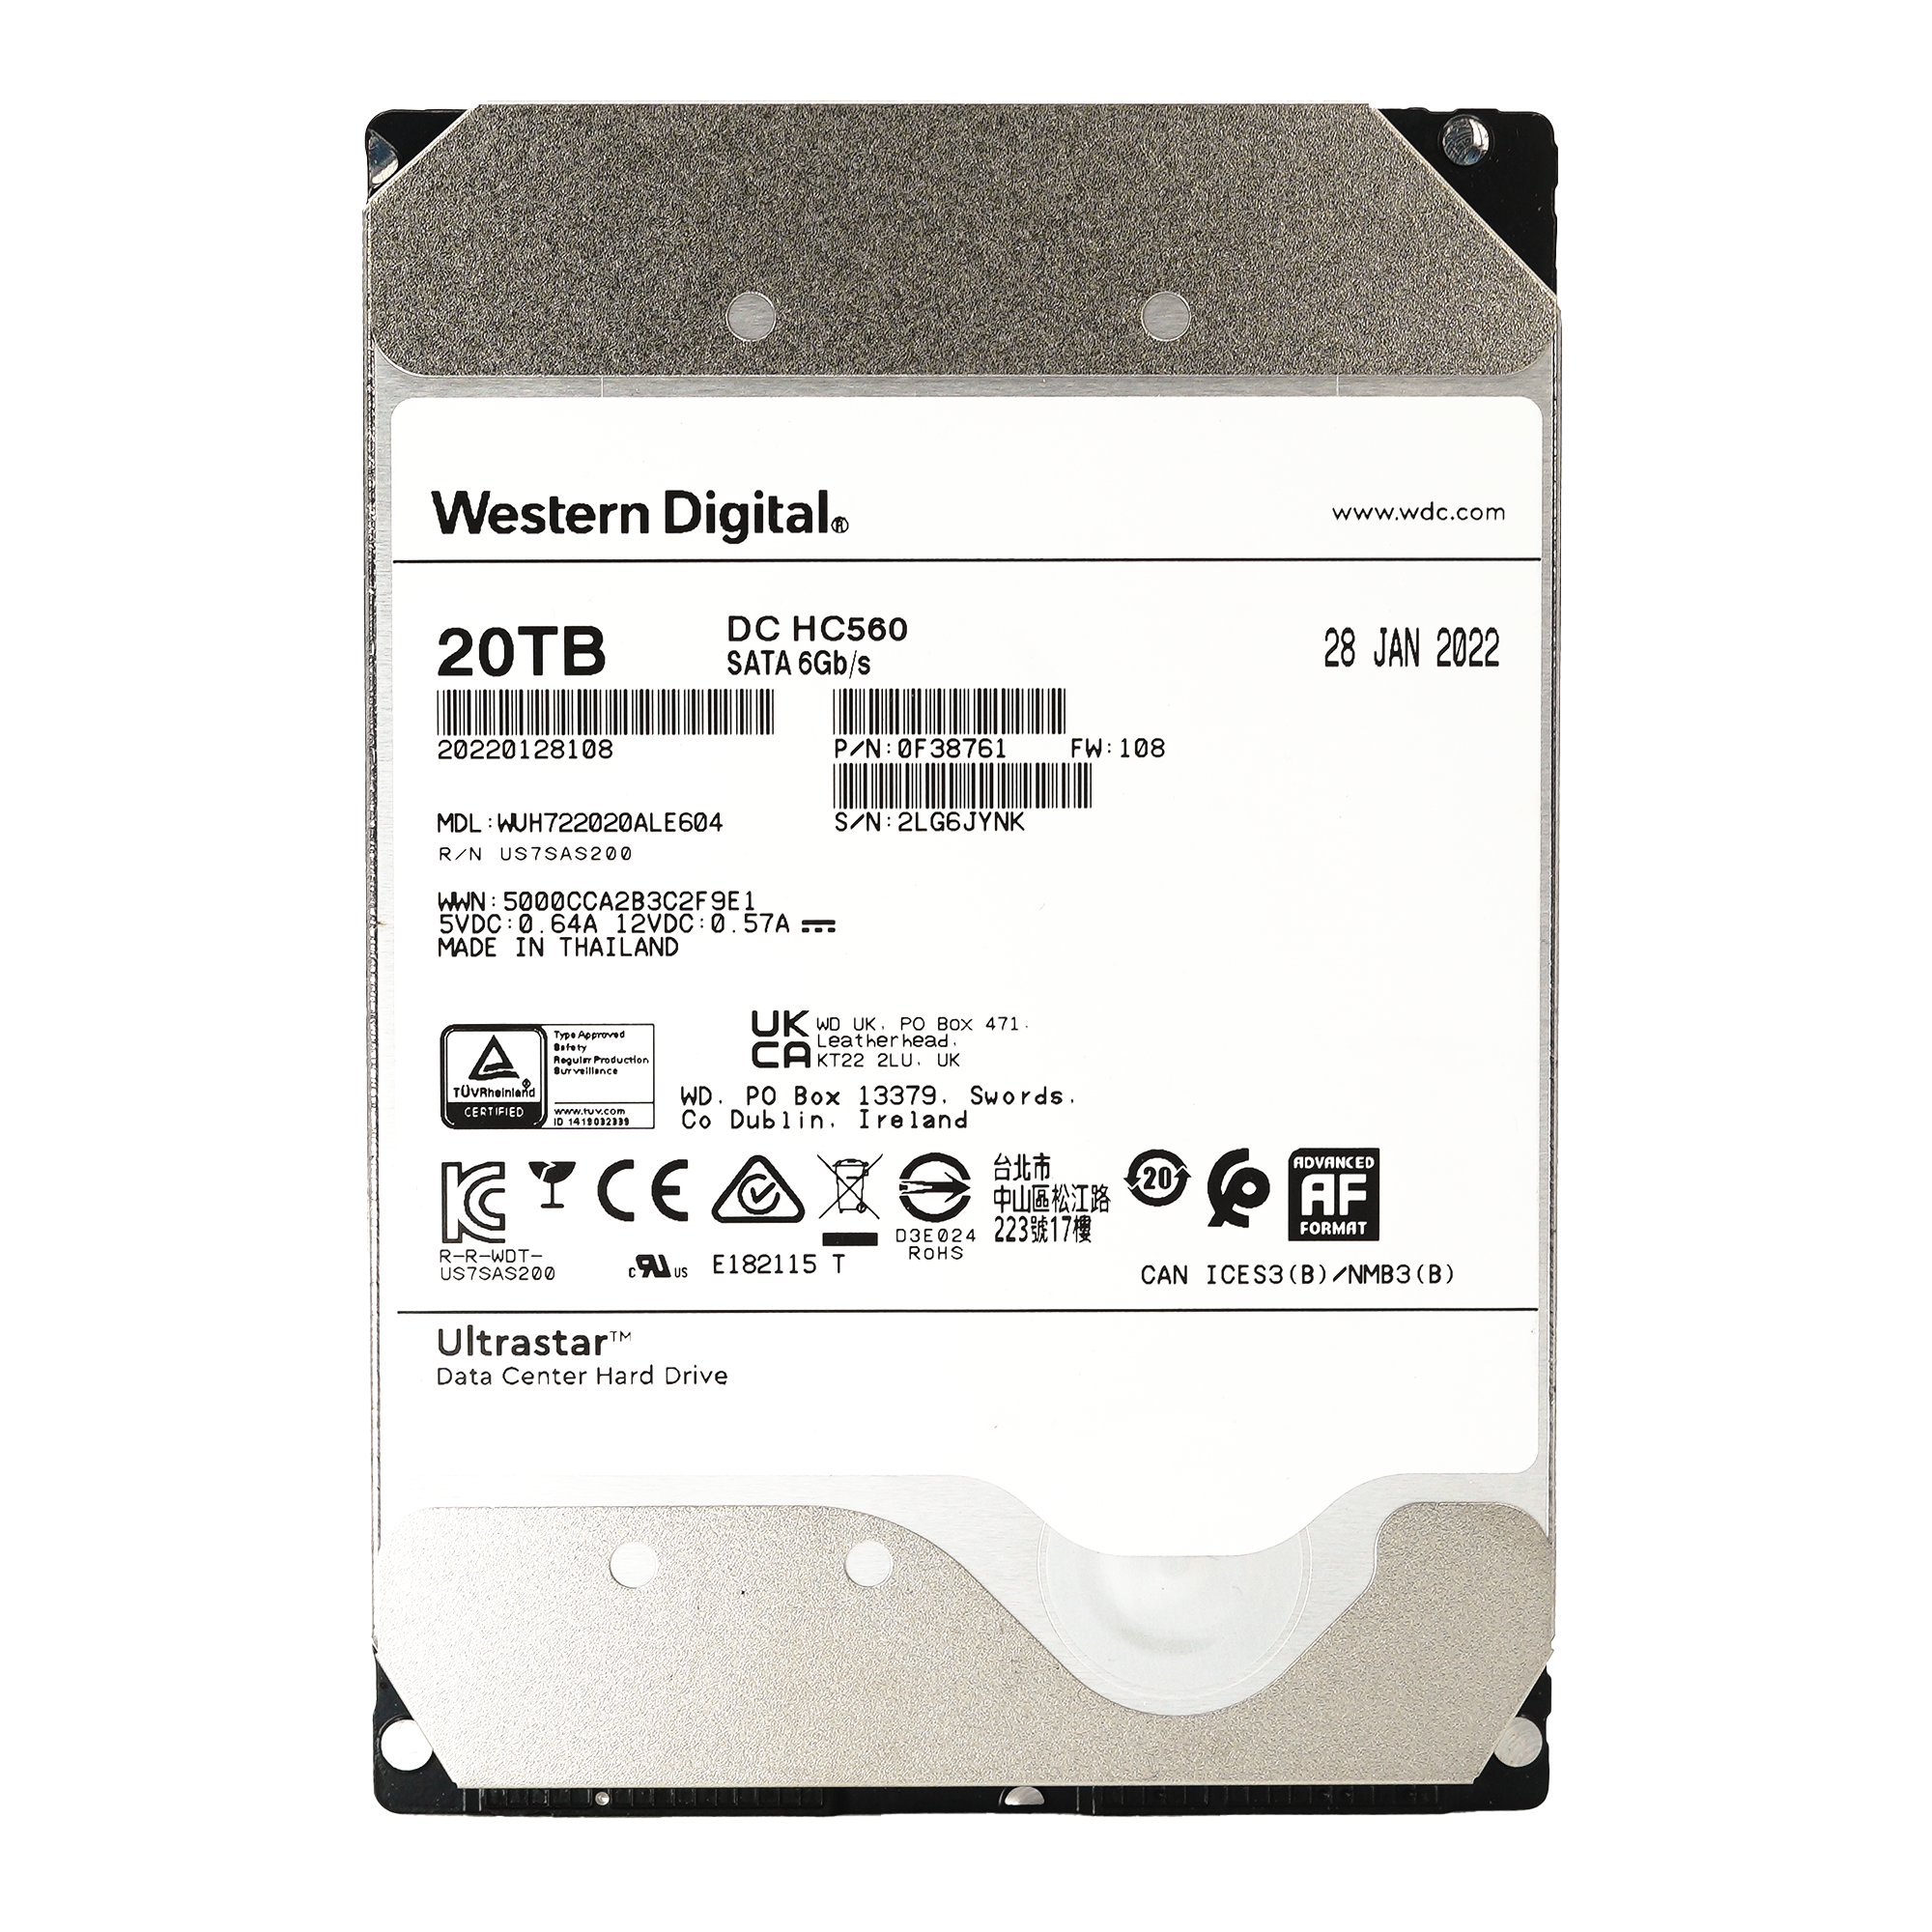 Western Digital Ultrastar HC560 WUH722020ALE604 0F38761 20TB 7.2K RPM Power Disable SATA 6Gb/s 512e 3.5in Hard Drive - Front View